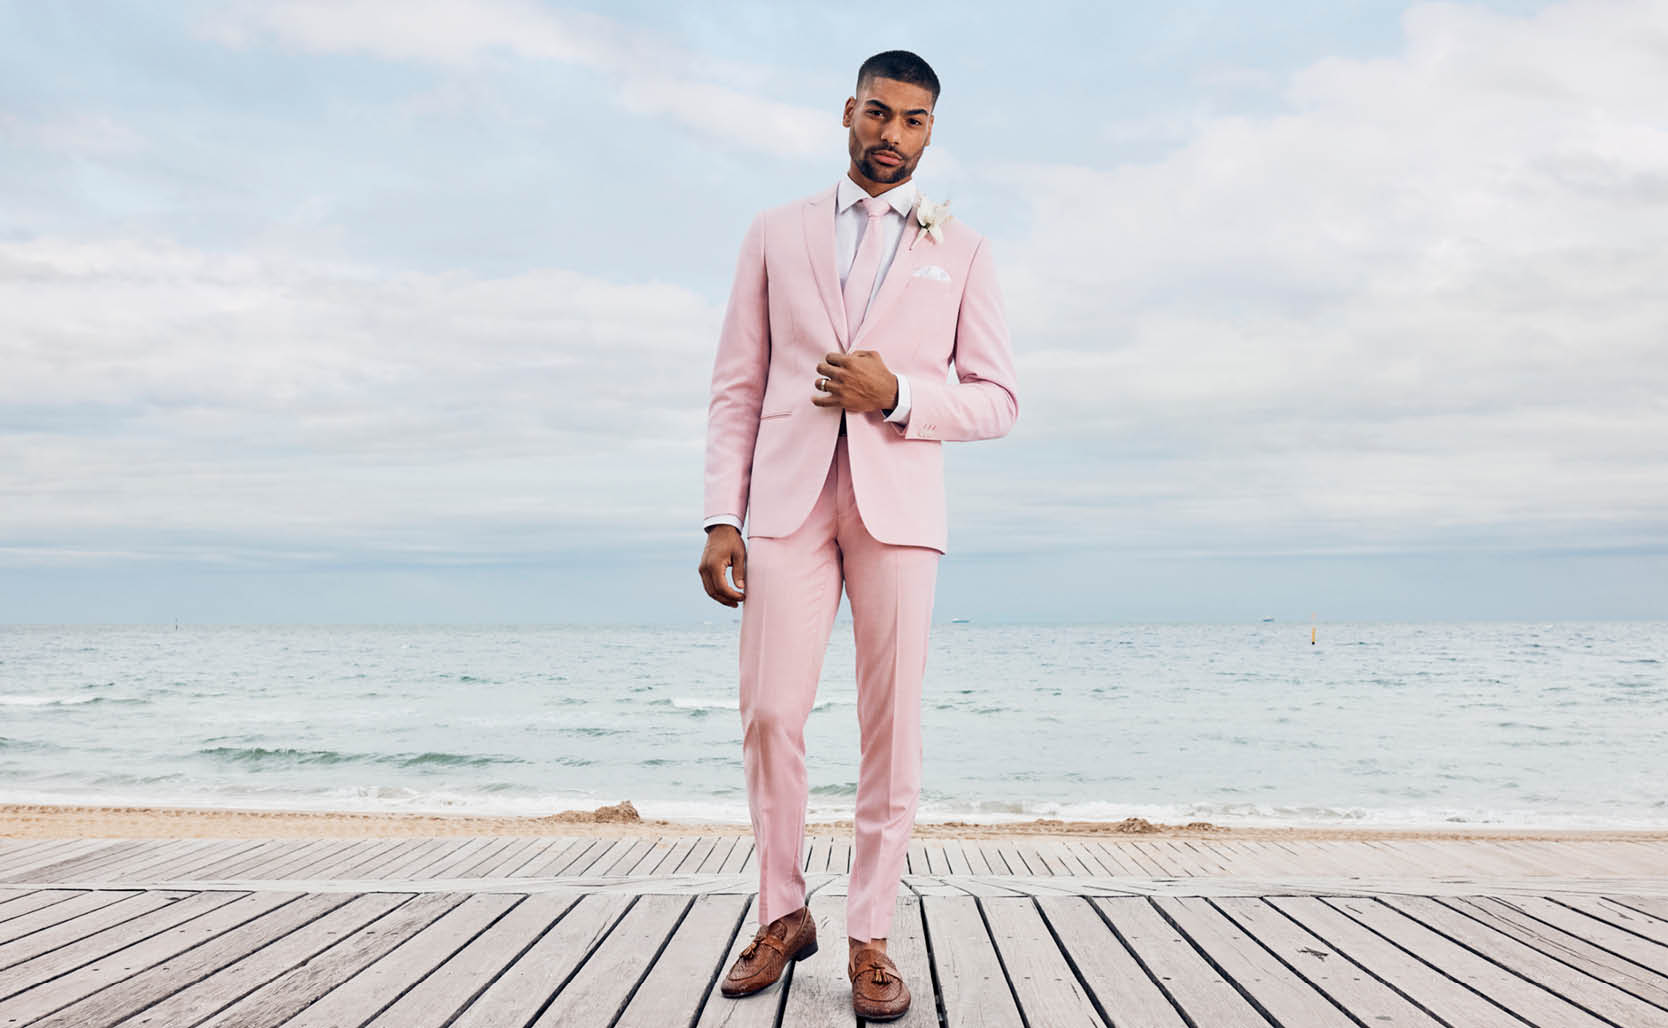 Male model wearing POLITIX pink suit and white shirt on beach boardwalk in front of ocean